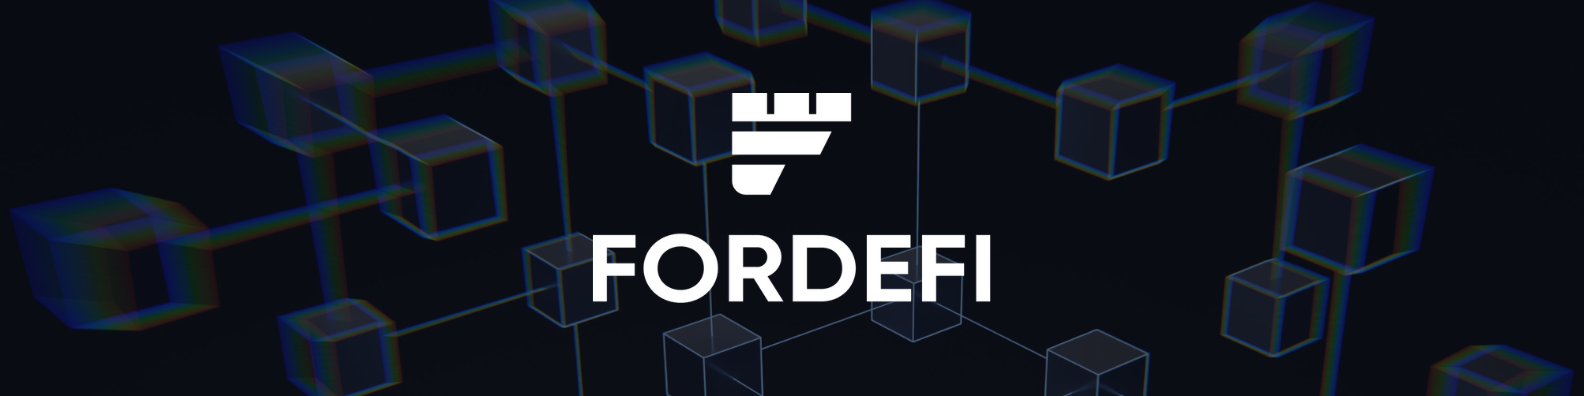 Fordefi Launches First Institutional DeFi Wallet & Security Platform